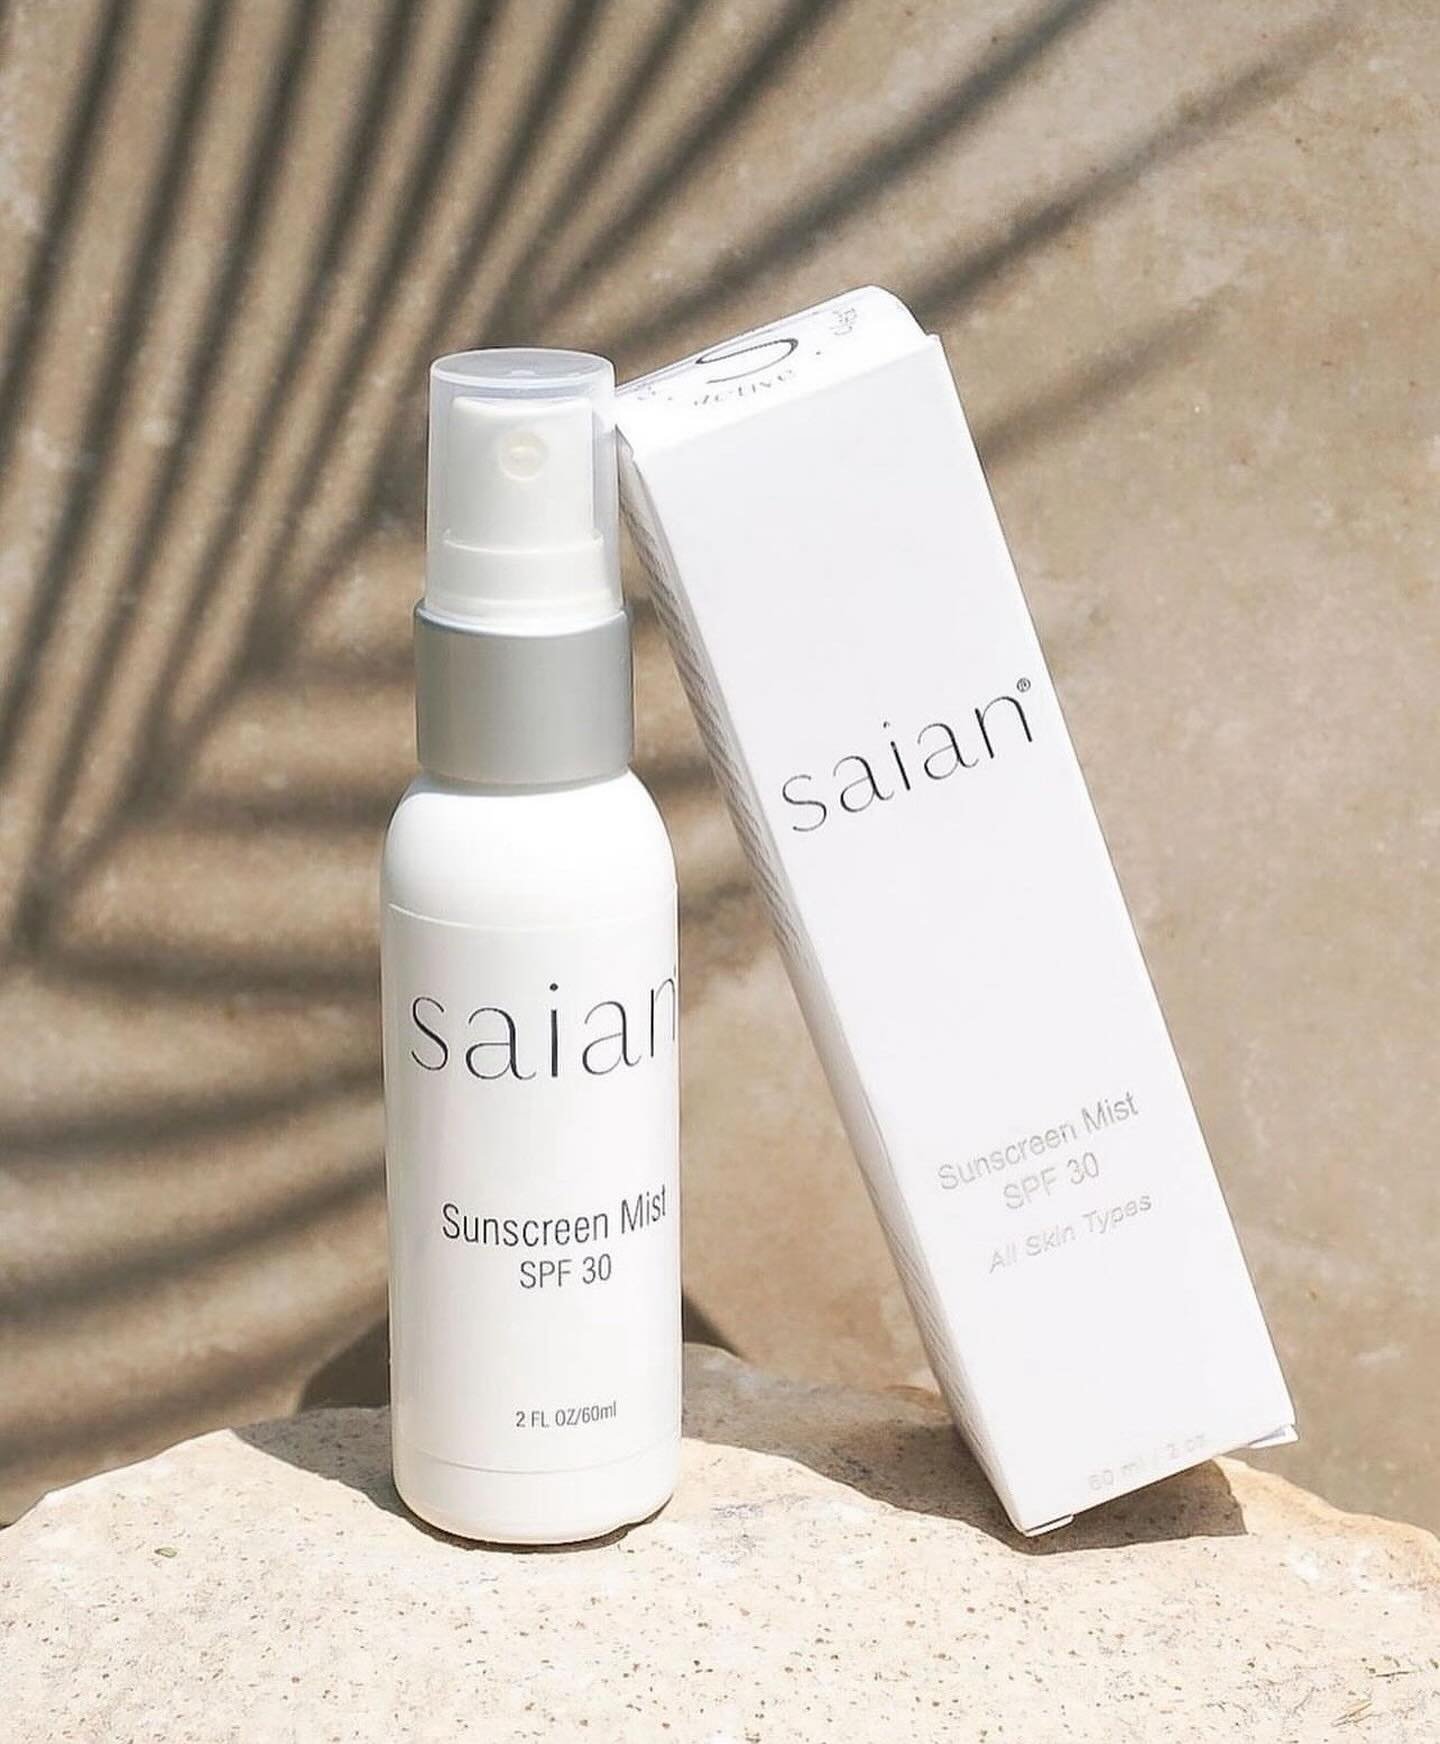 Excited to be offering @saian_skincare a boutique professional skincare brand specializing in the most advanced natural hypoallergenic skincare products containing no artificial color, no artificial fragrance, and no parabens for use on the most sens